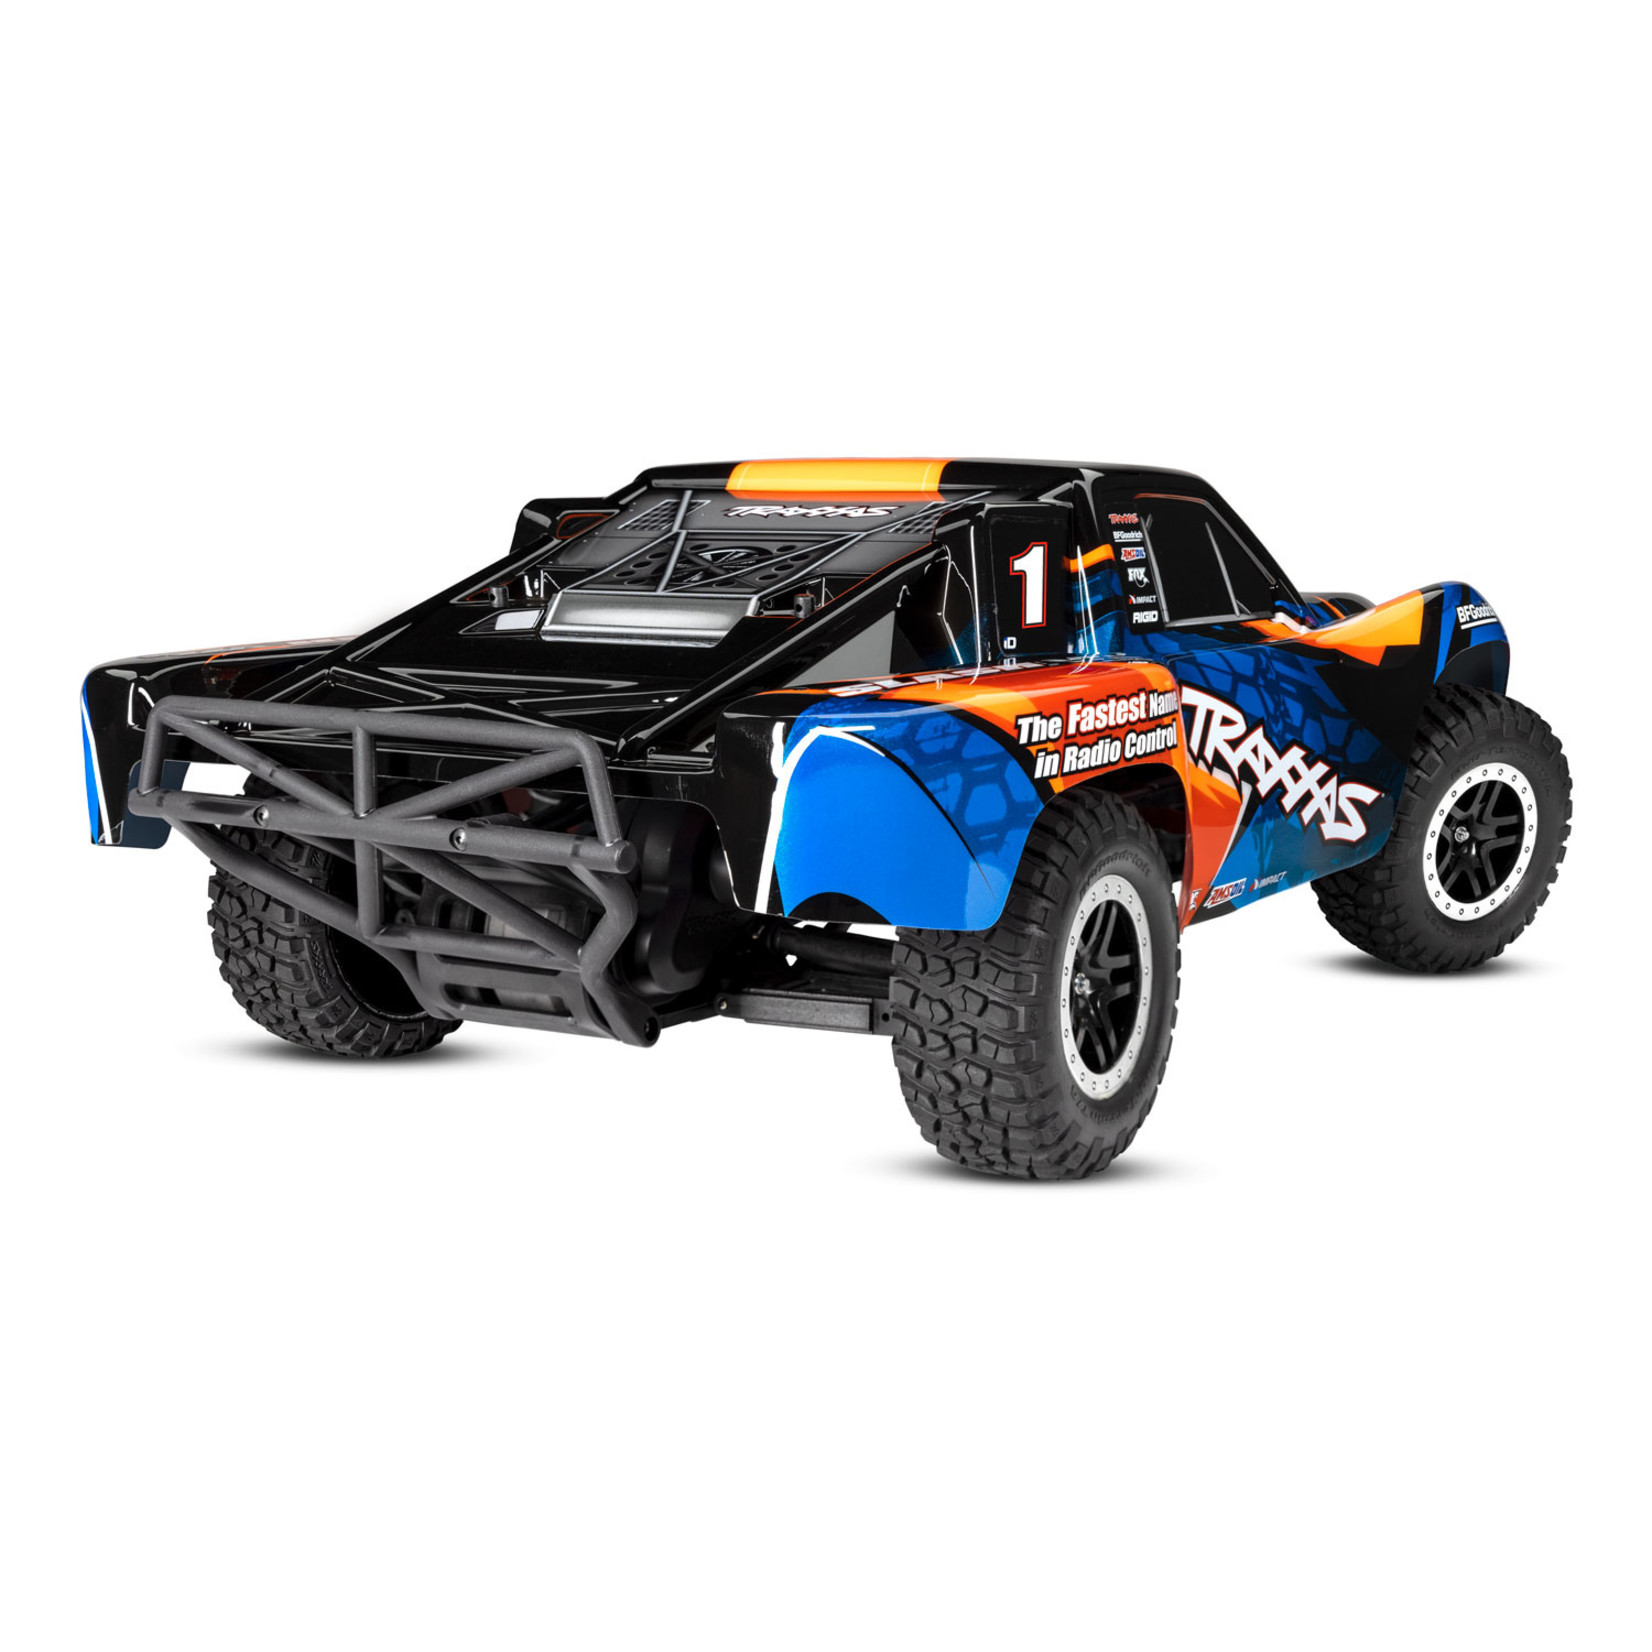 Traxxas Slash VXL:  1/10 Scale 2WD Brushless Short Course Racing Truck with Magnum 272R transmission & Traxxas Stability Management (TSM)